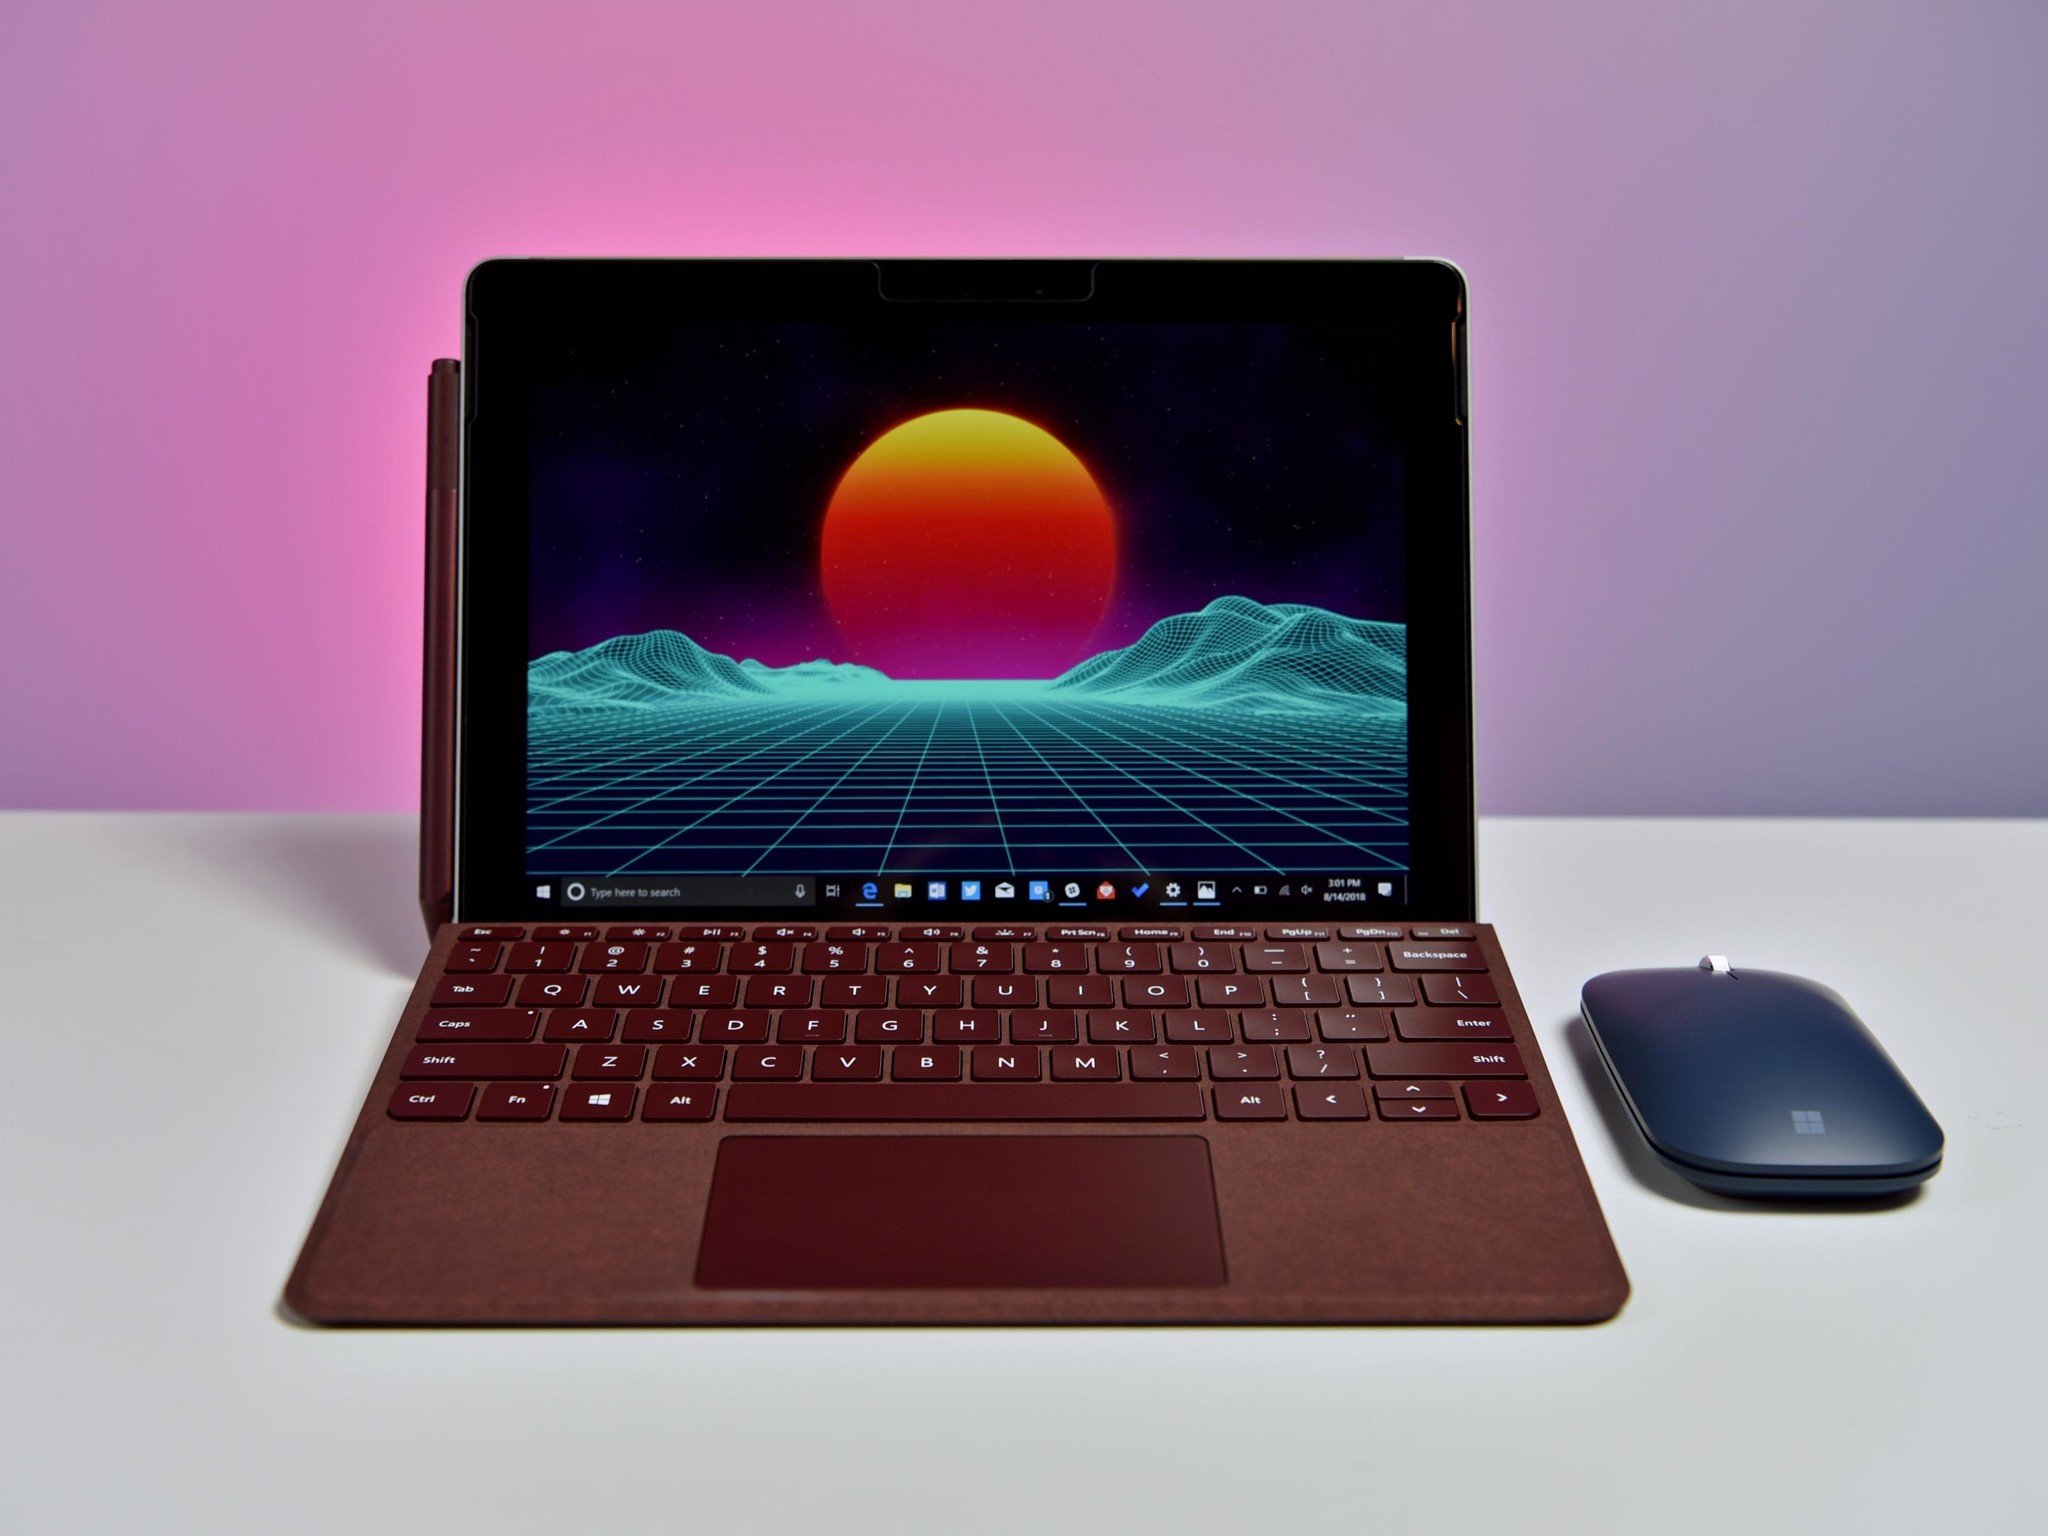 Microsoft begins selling $499 Surface Go with 4GB of RAM and faster 128GB SSD